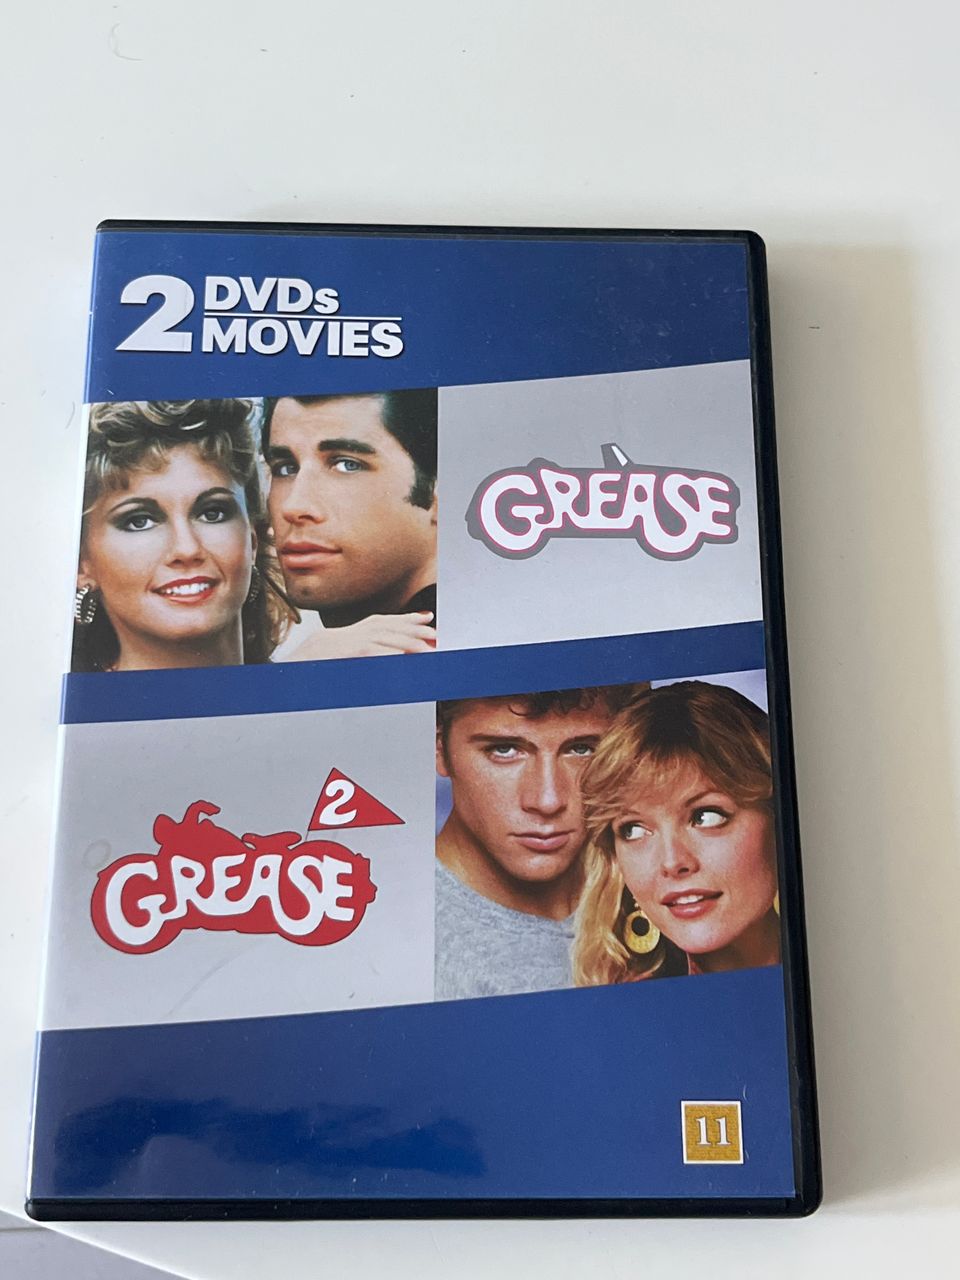 Grease 2 DVD Movies.